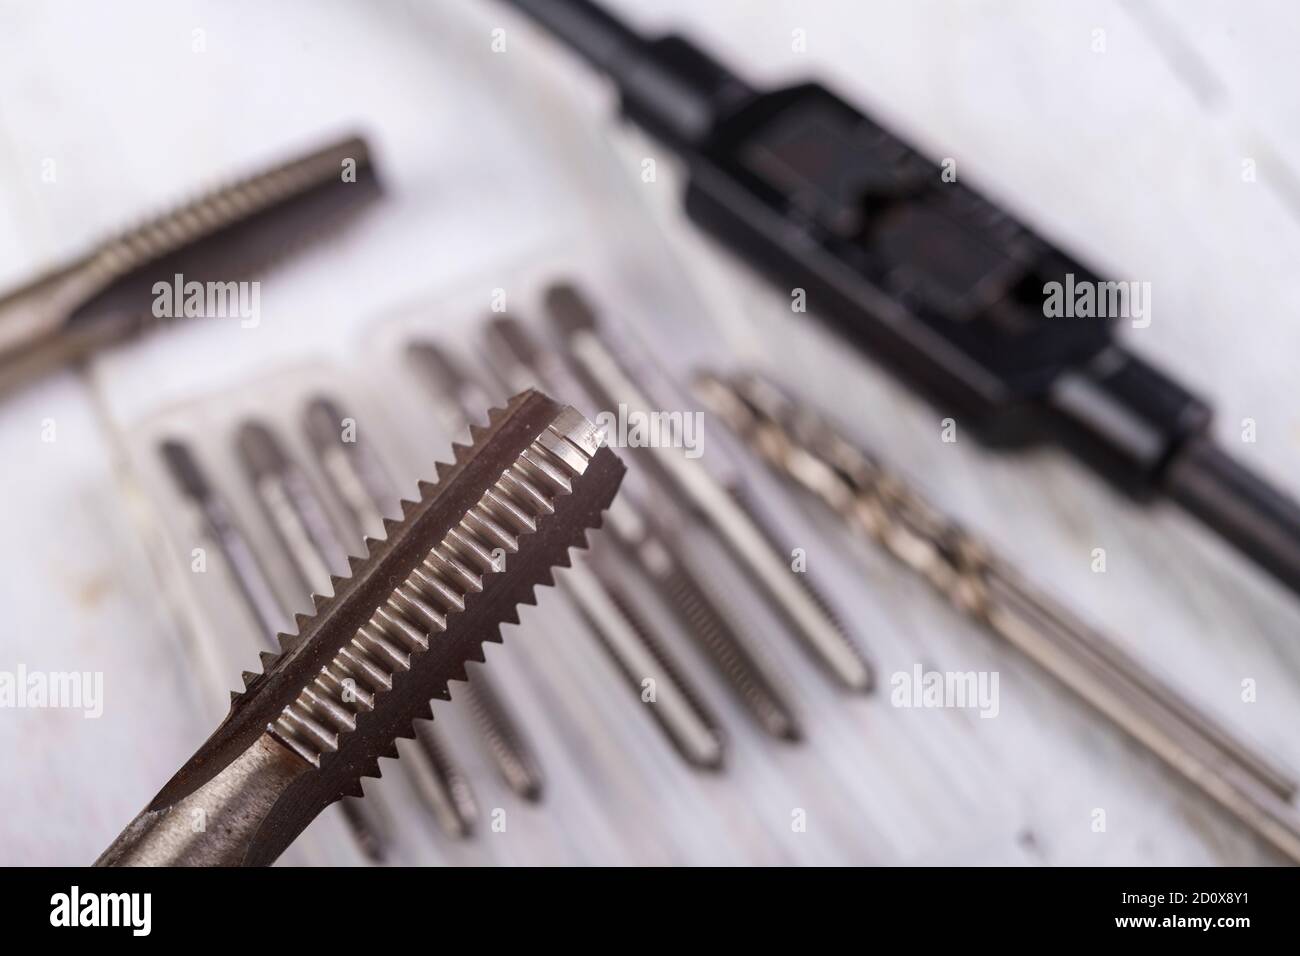 Metal taps prepared for work. Accessories in the locksmith's workshop. Light background. Stock Photo